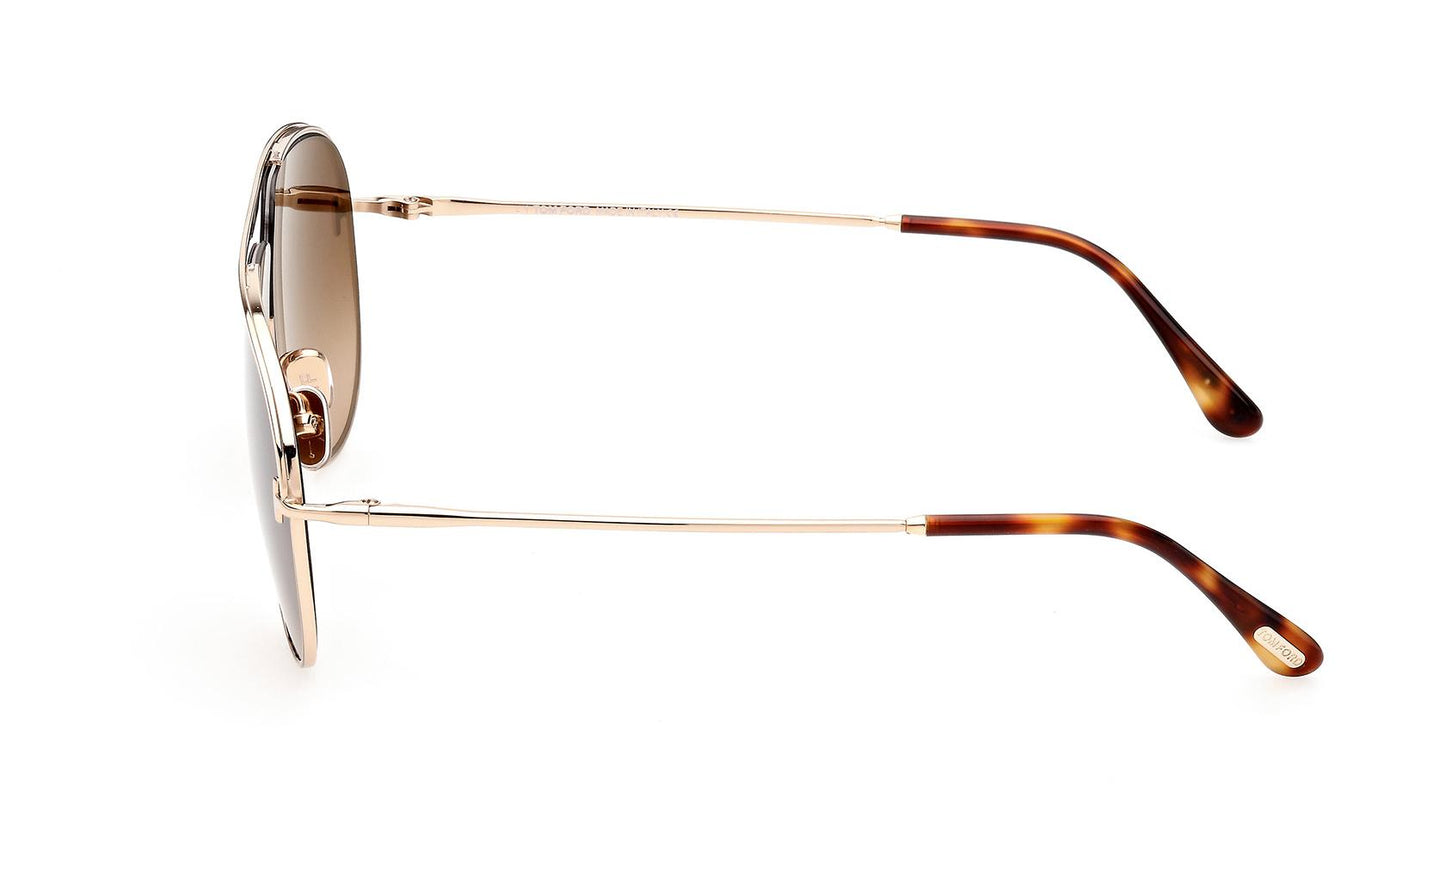 Load image into Gallery viewer, Tom Ford Theo Sunglasses FT0924 28F
